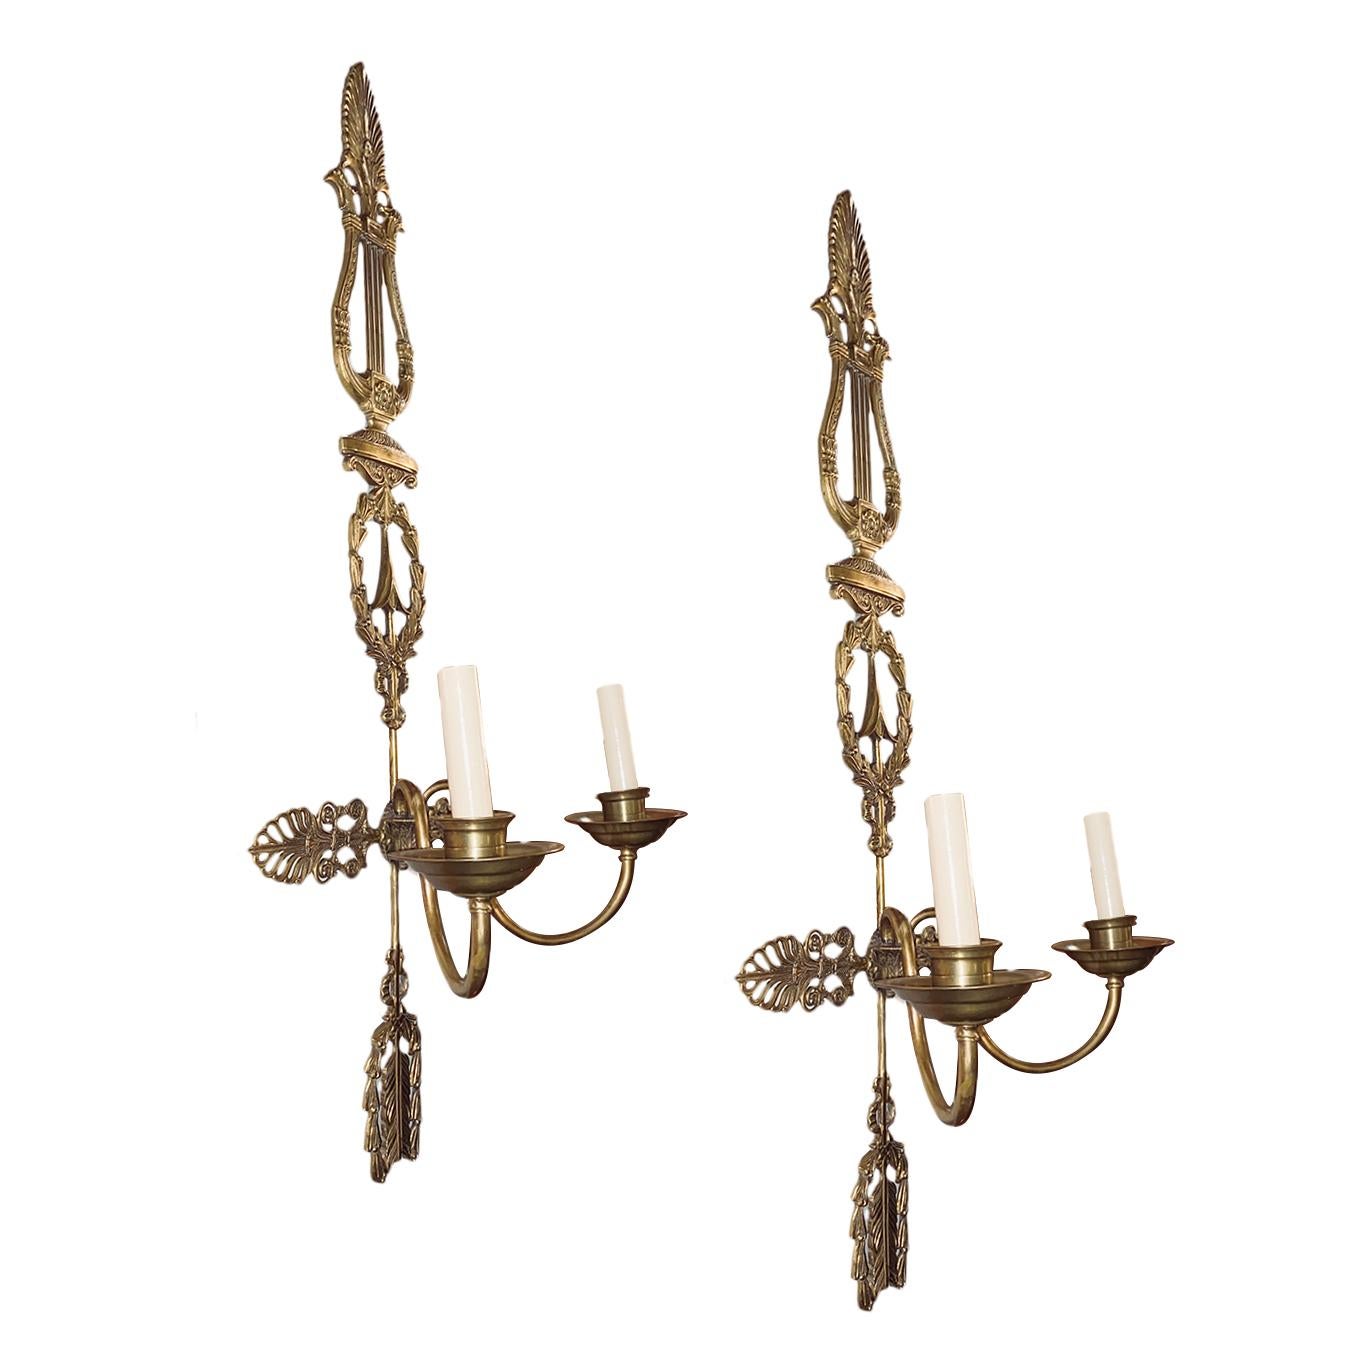 A pair of French circa 1920s Empire style gilt bronze sconces with harp motif.

Measurements:
Height 32.25